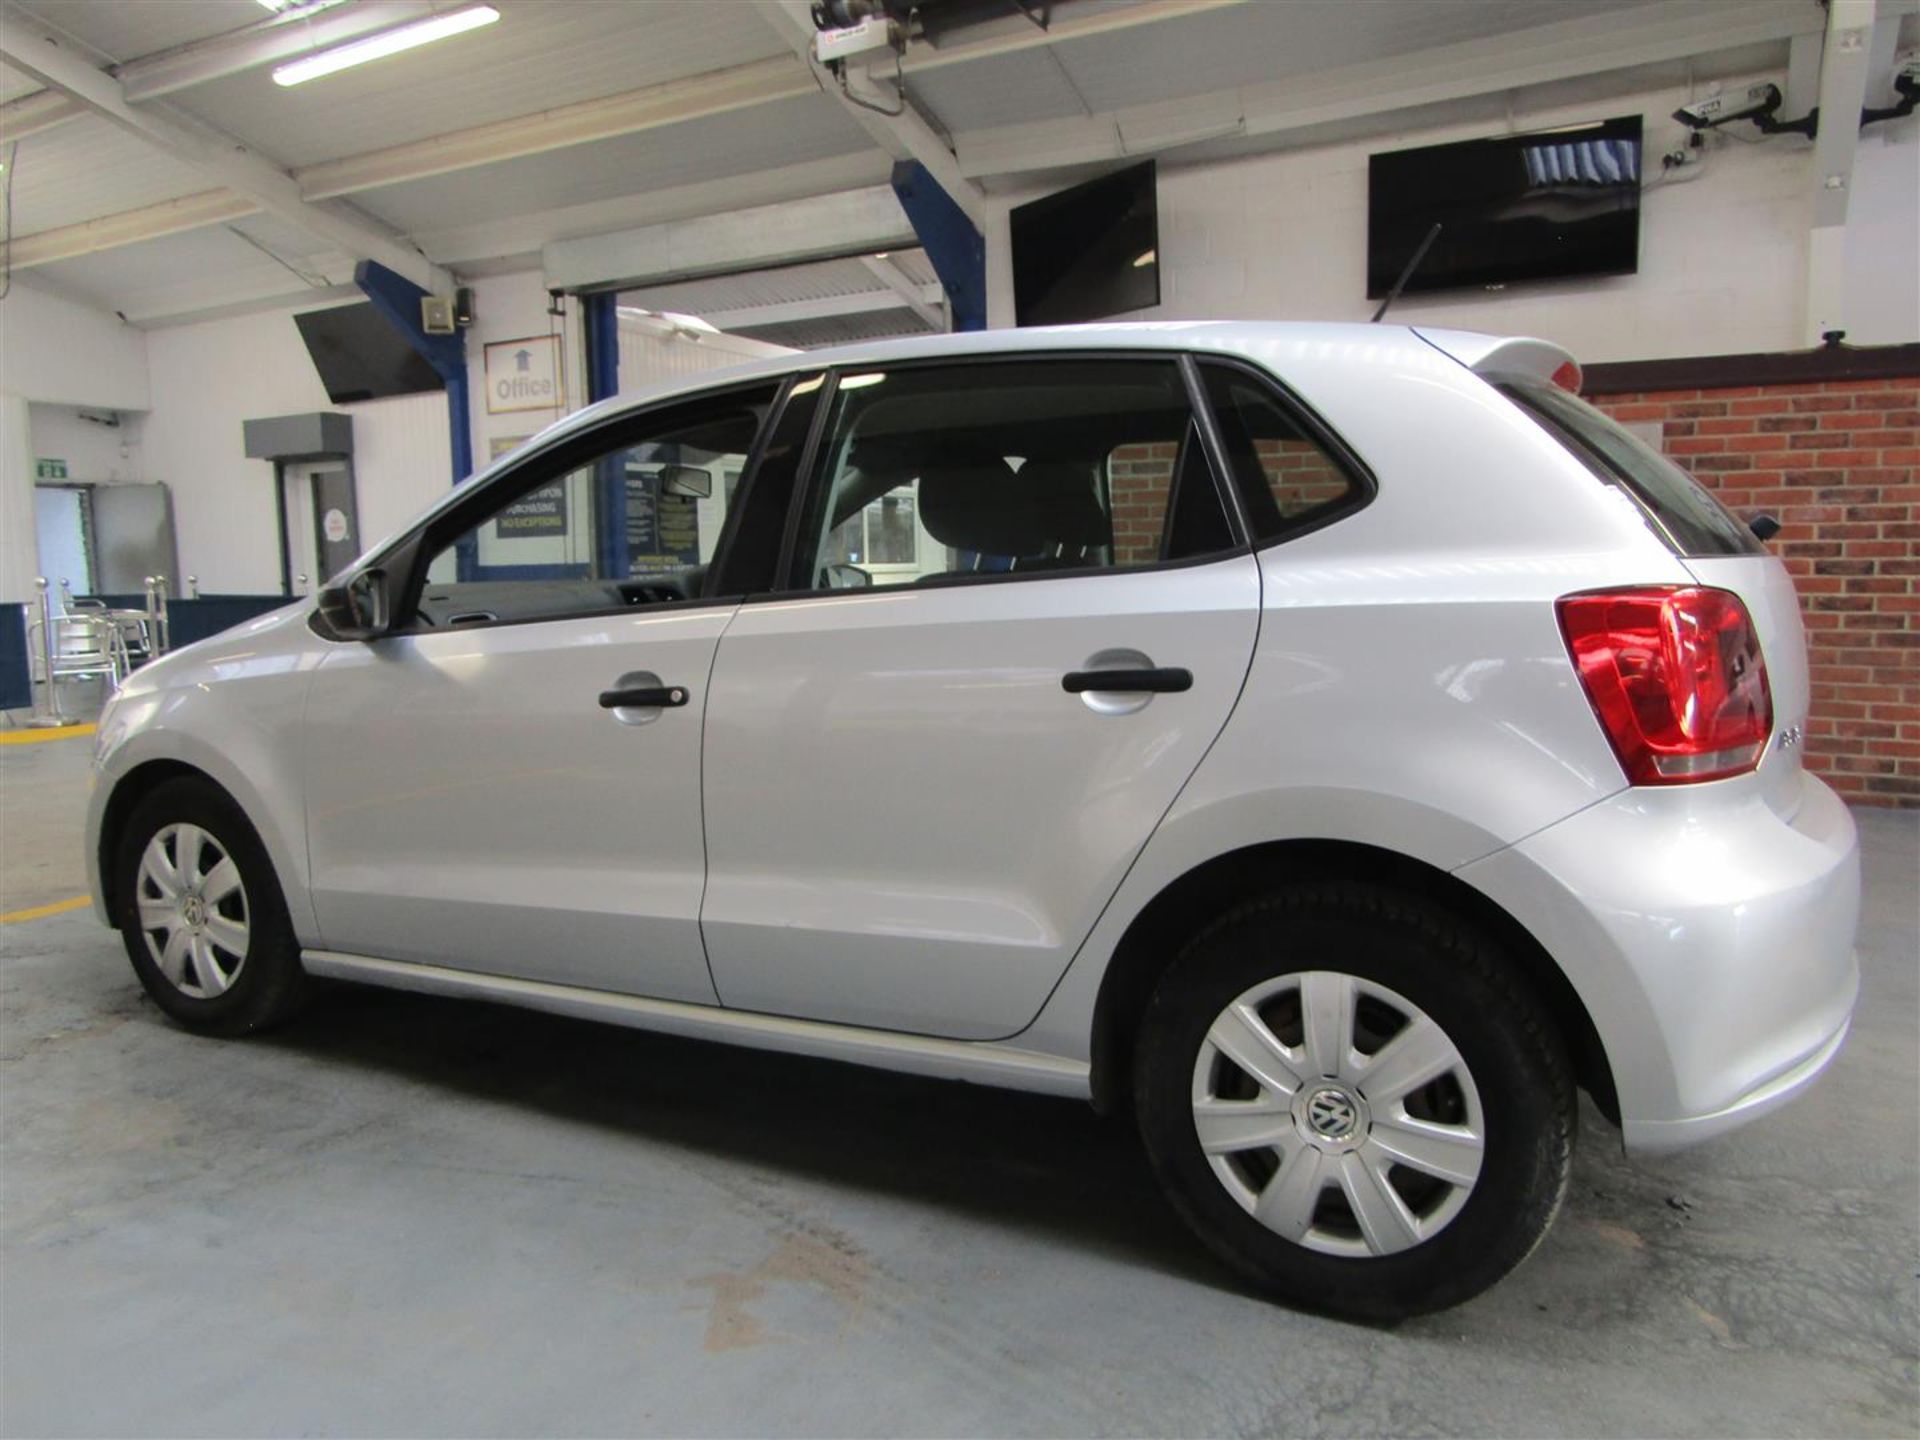 59 10 VW Polo S 60 - Image 28 of 29